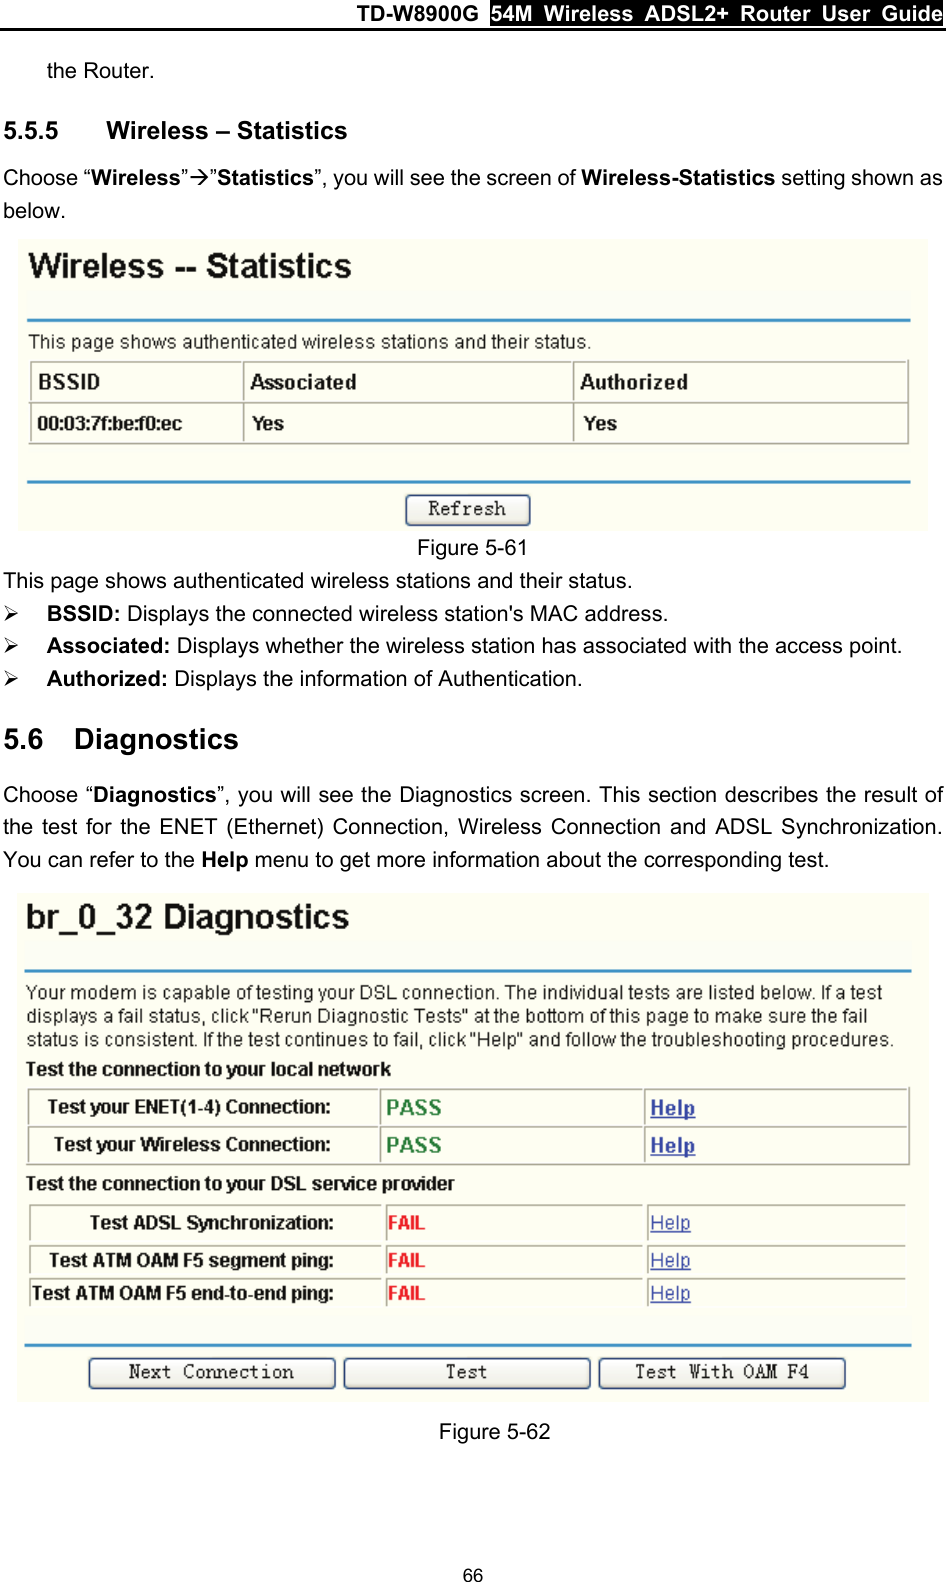 TD-W8900G  54M Wireless ADSL2+ Router User Guide 66 the Router. 5.5.5  Wireless – Statistics Choose “Wireless”Æ”Statistics”, you will see the screen of Wireless-Statistics setting shown as below.  Figure 5-61 This page shows authenticated wireless stations and their status. ¾ BSSID: Displays the connected wireless station&apos;s MAC address. ¾ Associated: Displays whether the wireless station has associated with the access point. ¾ Authorized: Displays the information of Authentication. 5.6  Diagnostics Choose “Diagnostics”, you will see the Diagnostics screen. This section describes the result of the test for the ENET (Ethernet) Connection, Wireless Connection and ADSL Synchronization. You can refer to the Help menu to get more information about the corresponding test.  Figure 5-62 